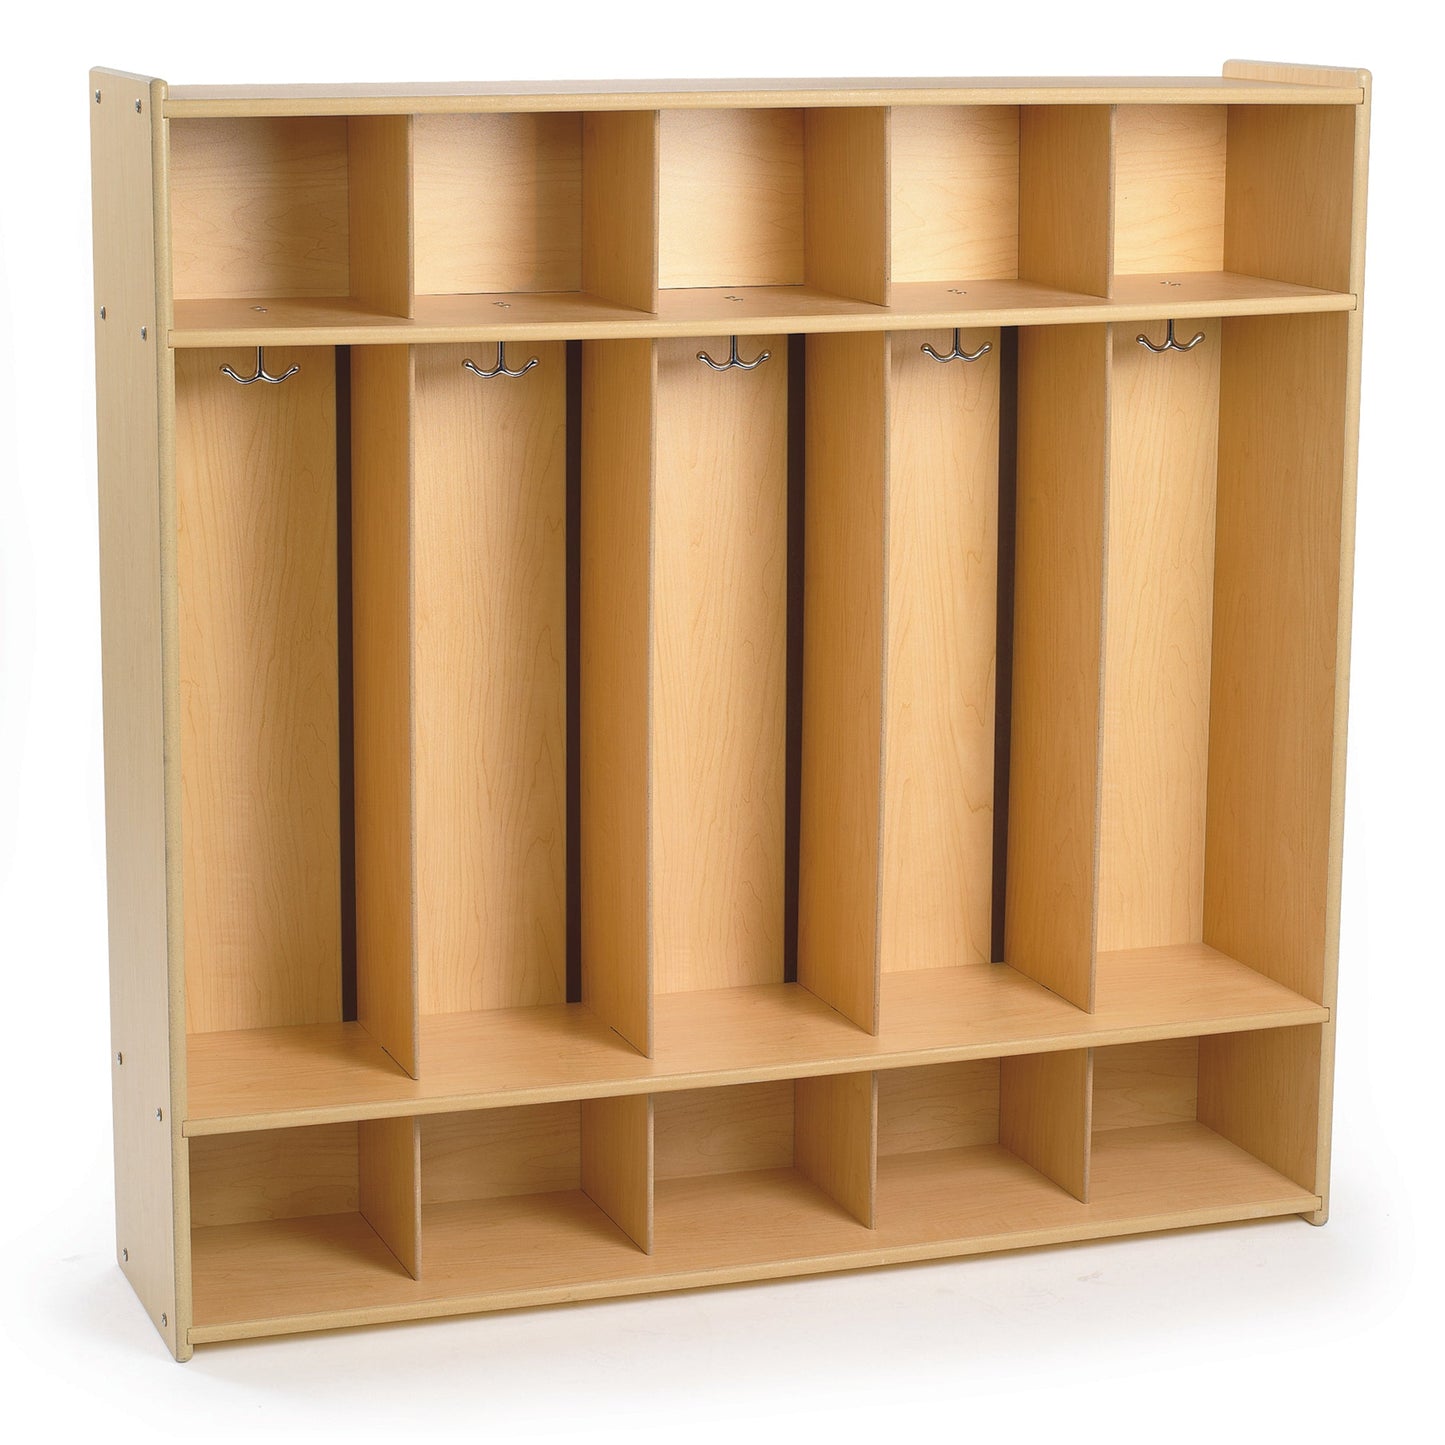 Angeles Value Line 5-Section Locker - 48"L x 12"W x 48"H (ANG7154) - SchoolOutlet